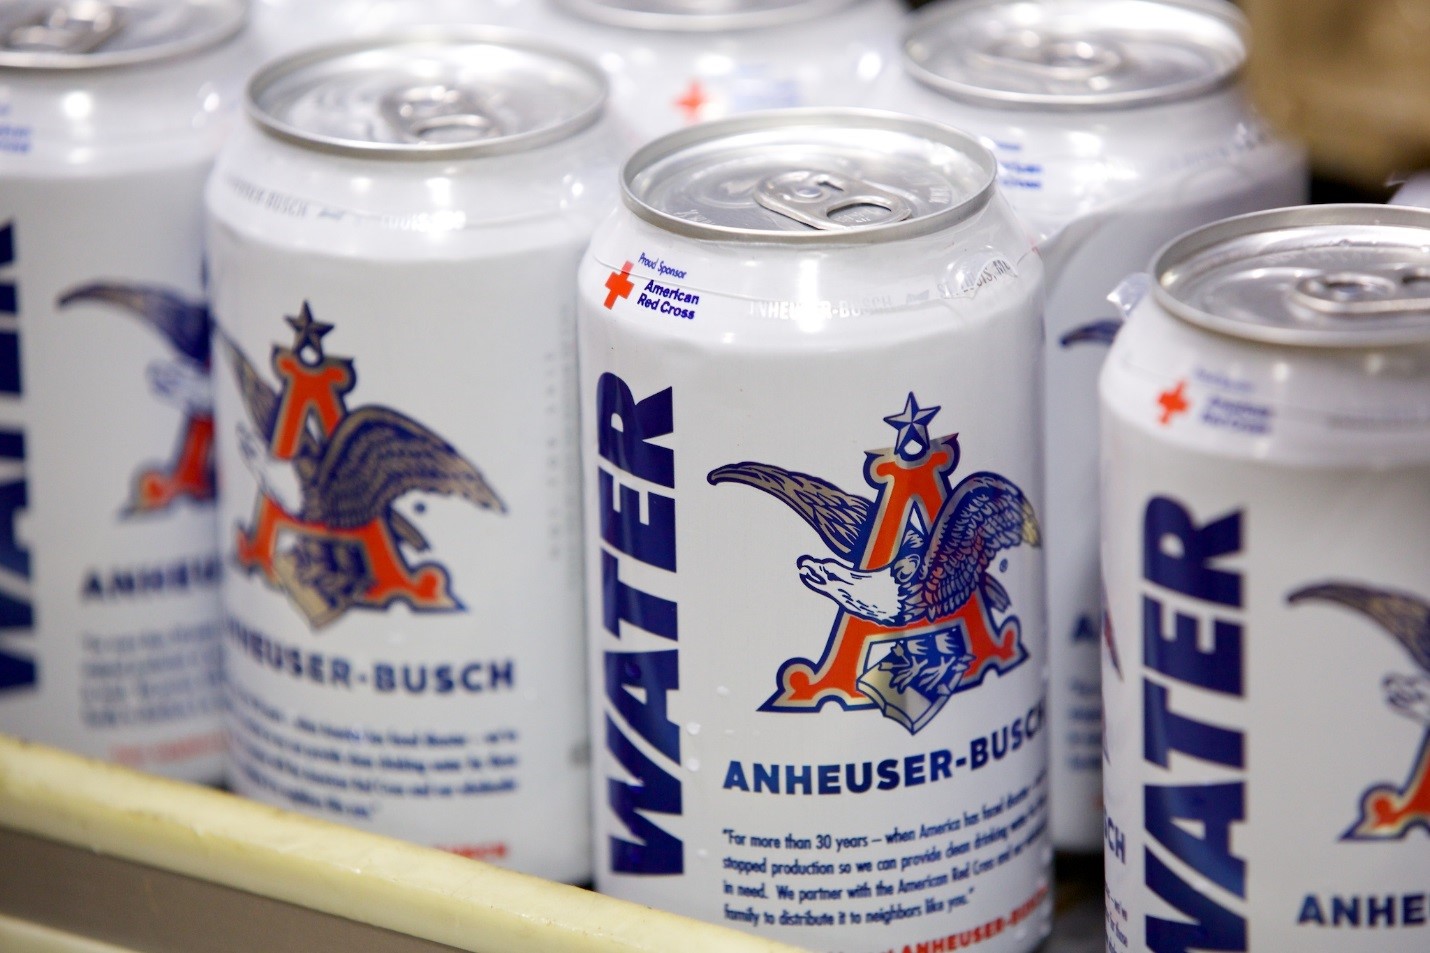 Anheuser-Busch Sending 150,000 Cans of Emergency Drinking Water to Missouri and Oklahoma to Aid Flood Relief Efforts